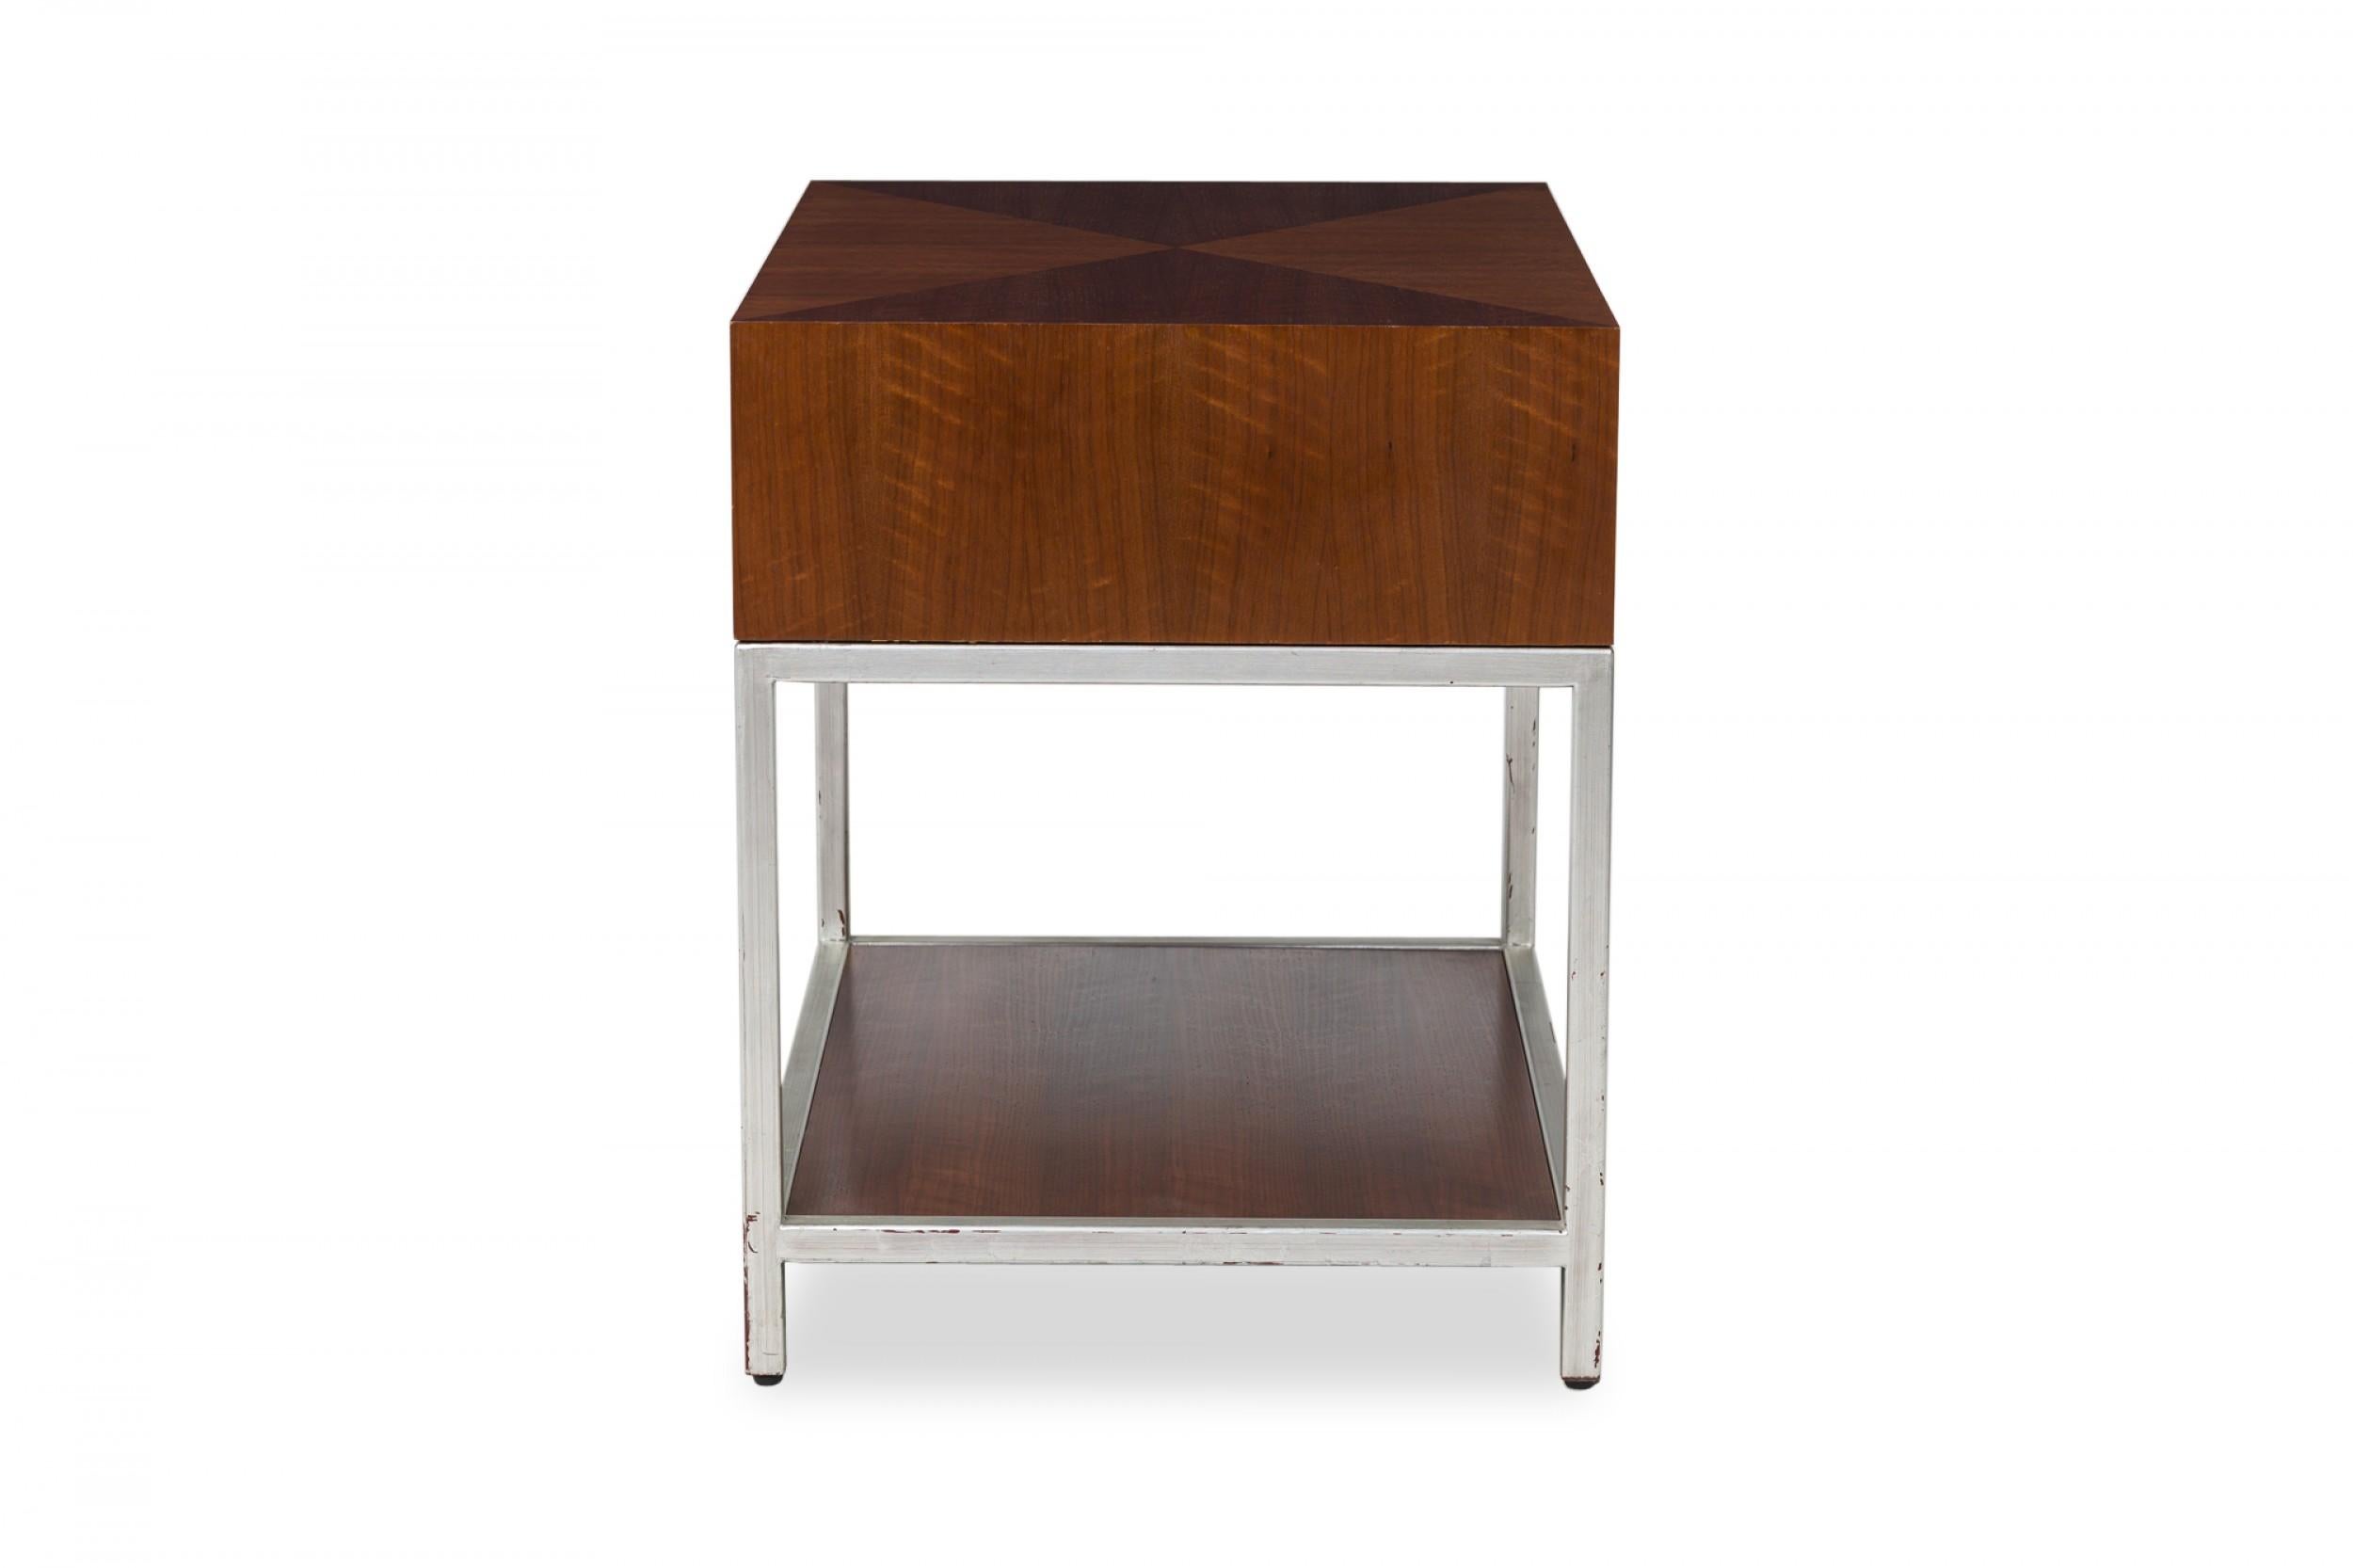 Painted Decca Contemporary Modern Tiger Wood Veneer & Chrome Rectangular End/Side Tables